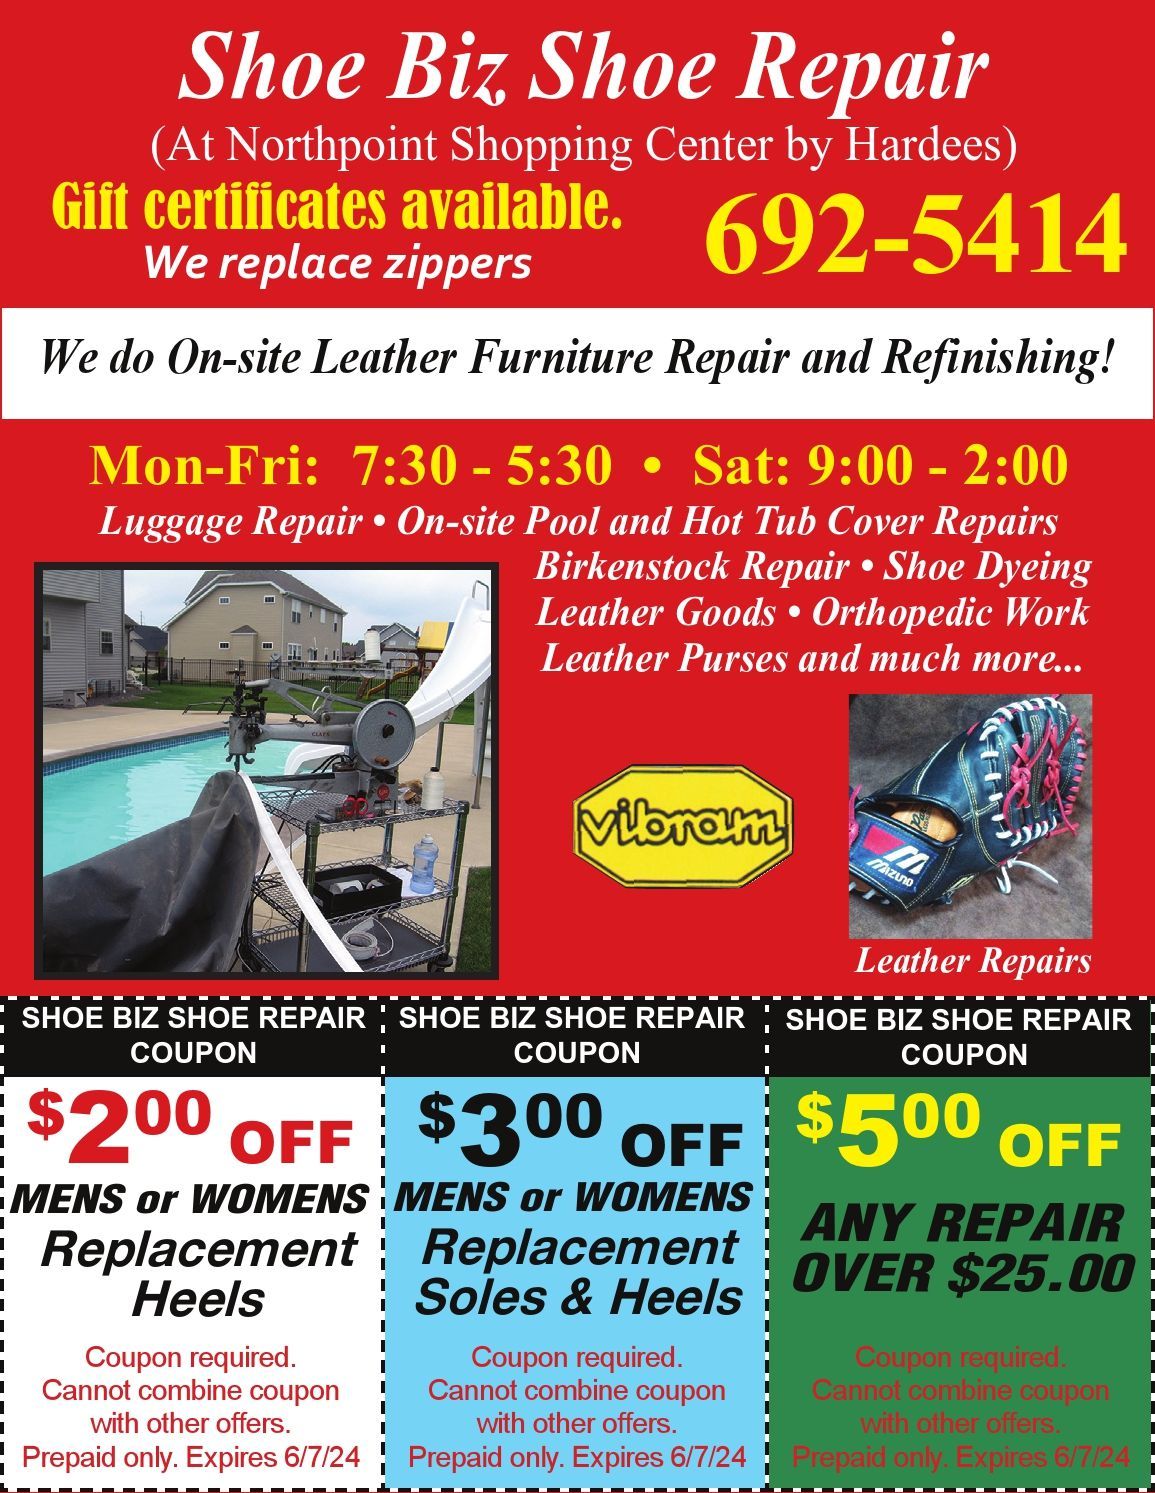 Shoe Biz Shoe Repair, replacement soles & heels, in-home repairs, pool, hot tub cover repairs, leather, shoe dyeing, $5 off $25 coupons, Northpoint Shopping Center, Peoria, IL